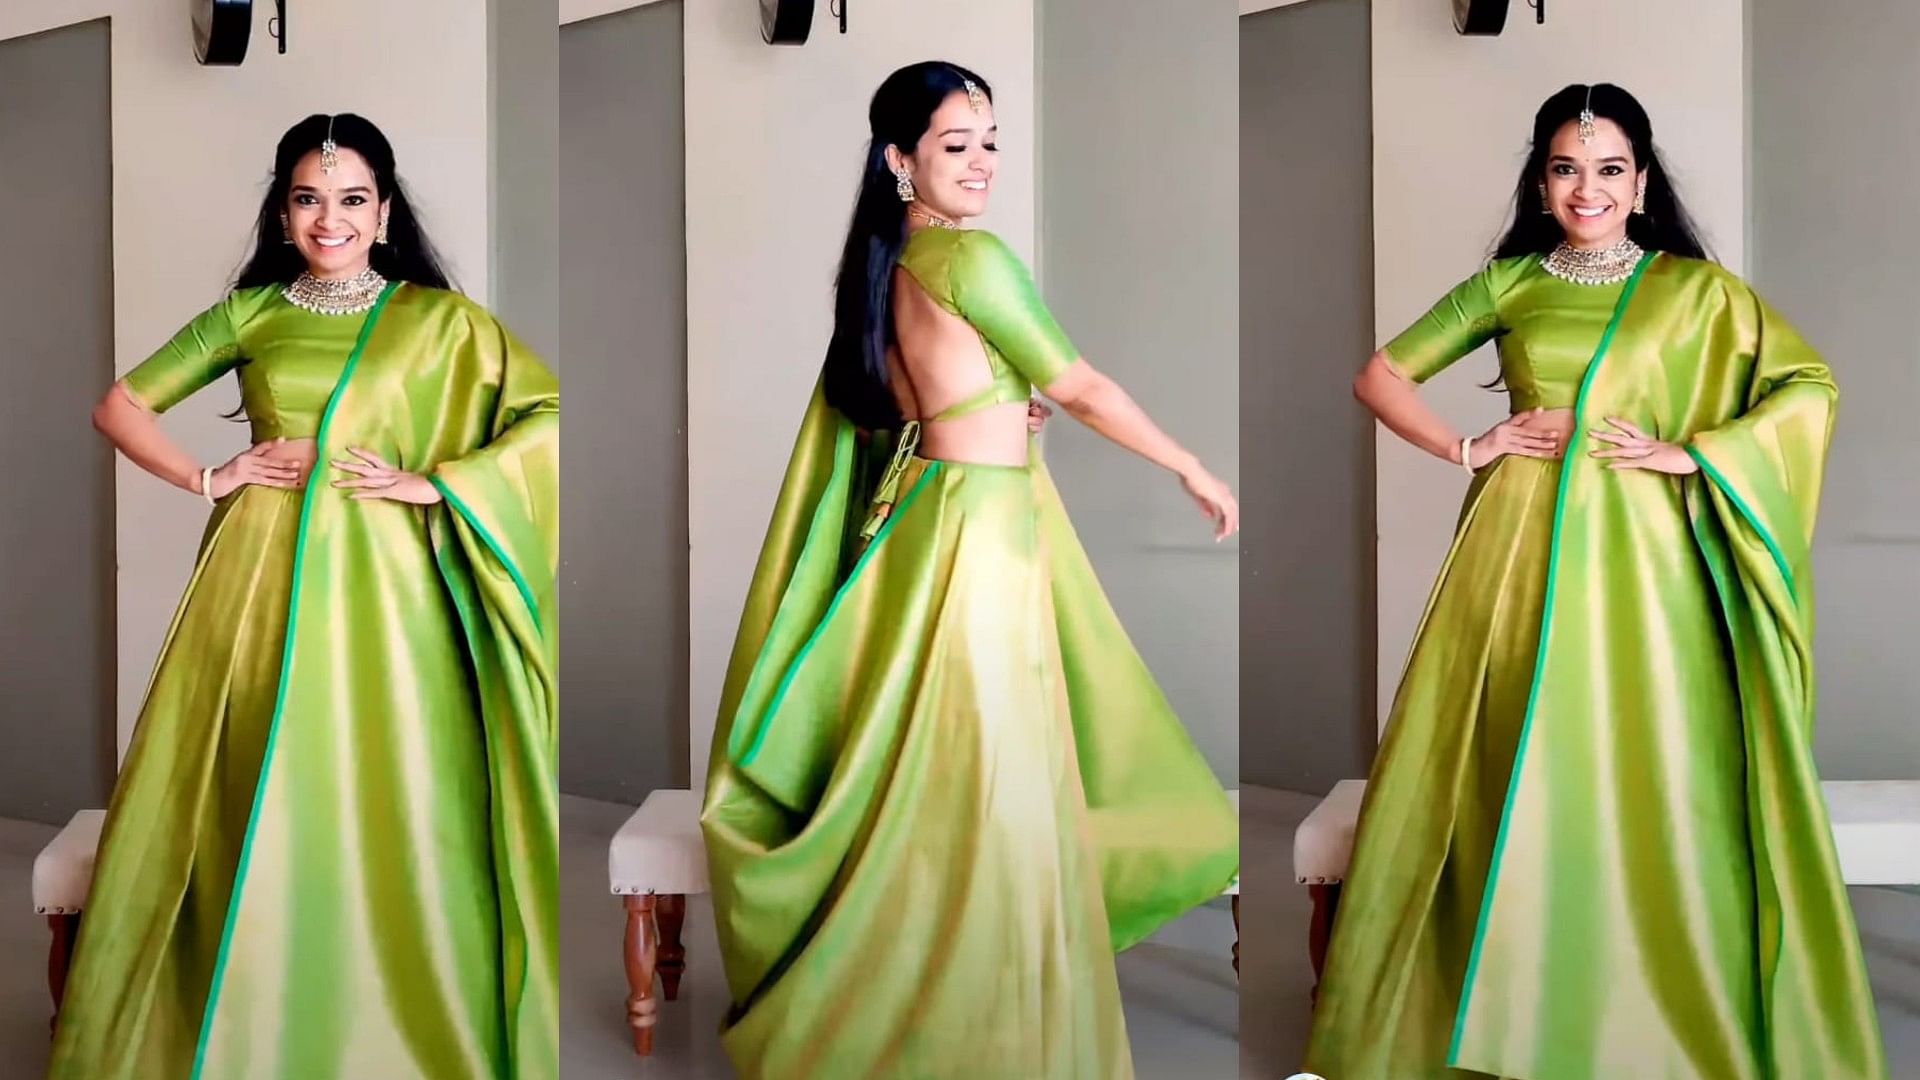 Unique Style Saree Draping With Back Look / how to wear Bollywood Style  Saree - YouTube | Saree, Bollywood fashion, Saree draping styles